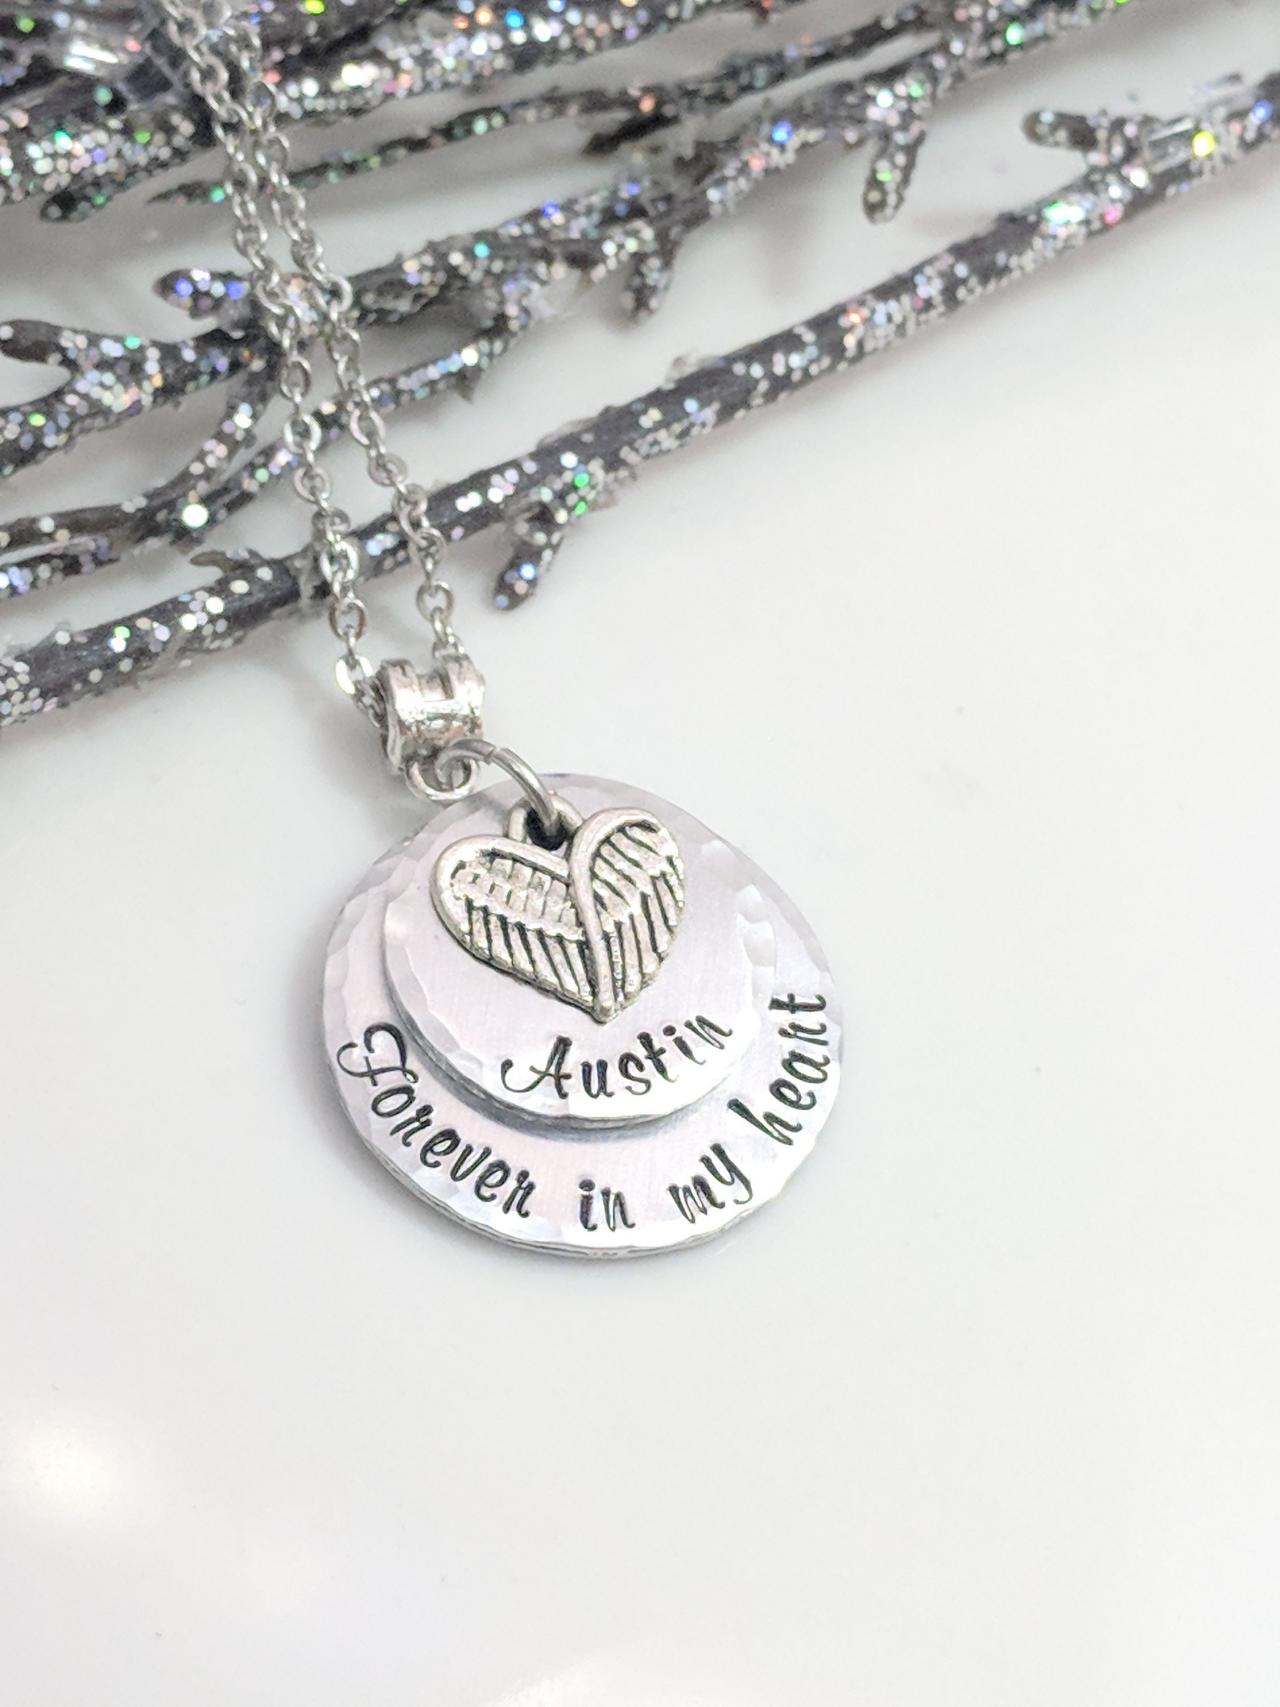 Hand Stamped Necklace Forever In My Heart - Sympathy Gift - Memorial Necklace - In Memory Of Jewelry - Personalized - Hand Stamped Jewelry -